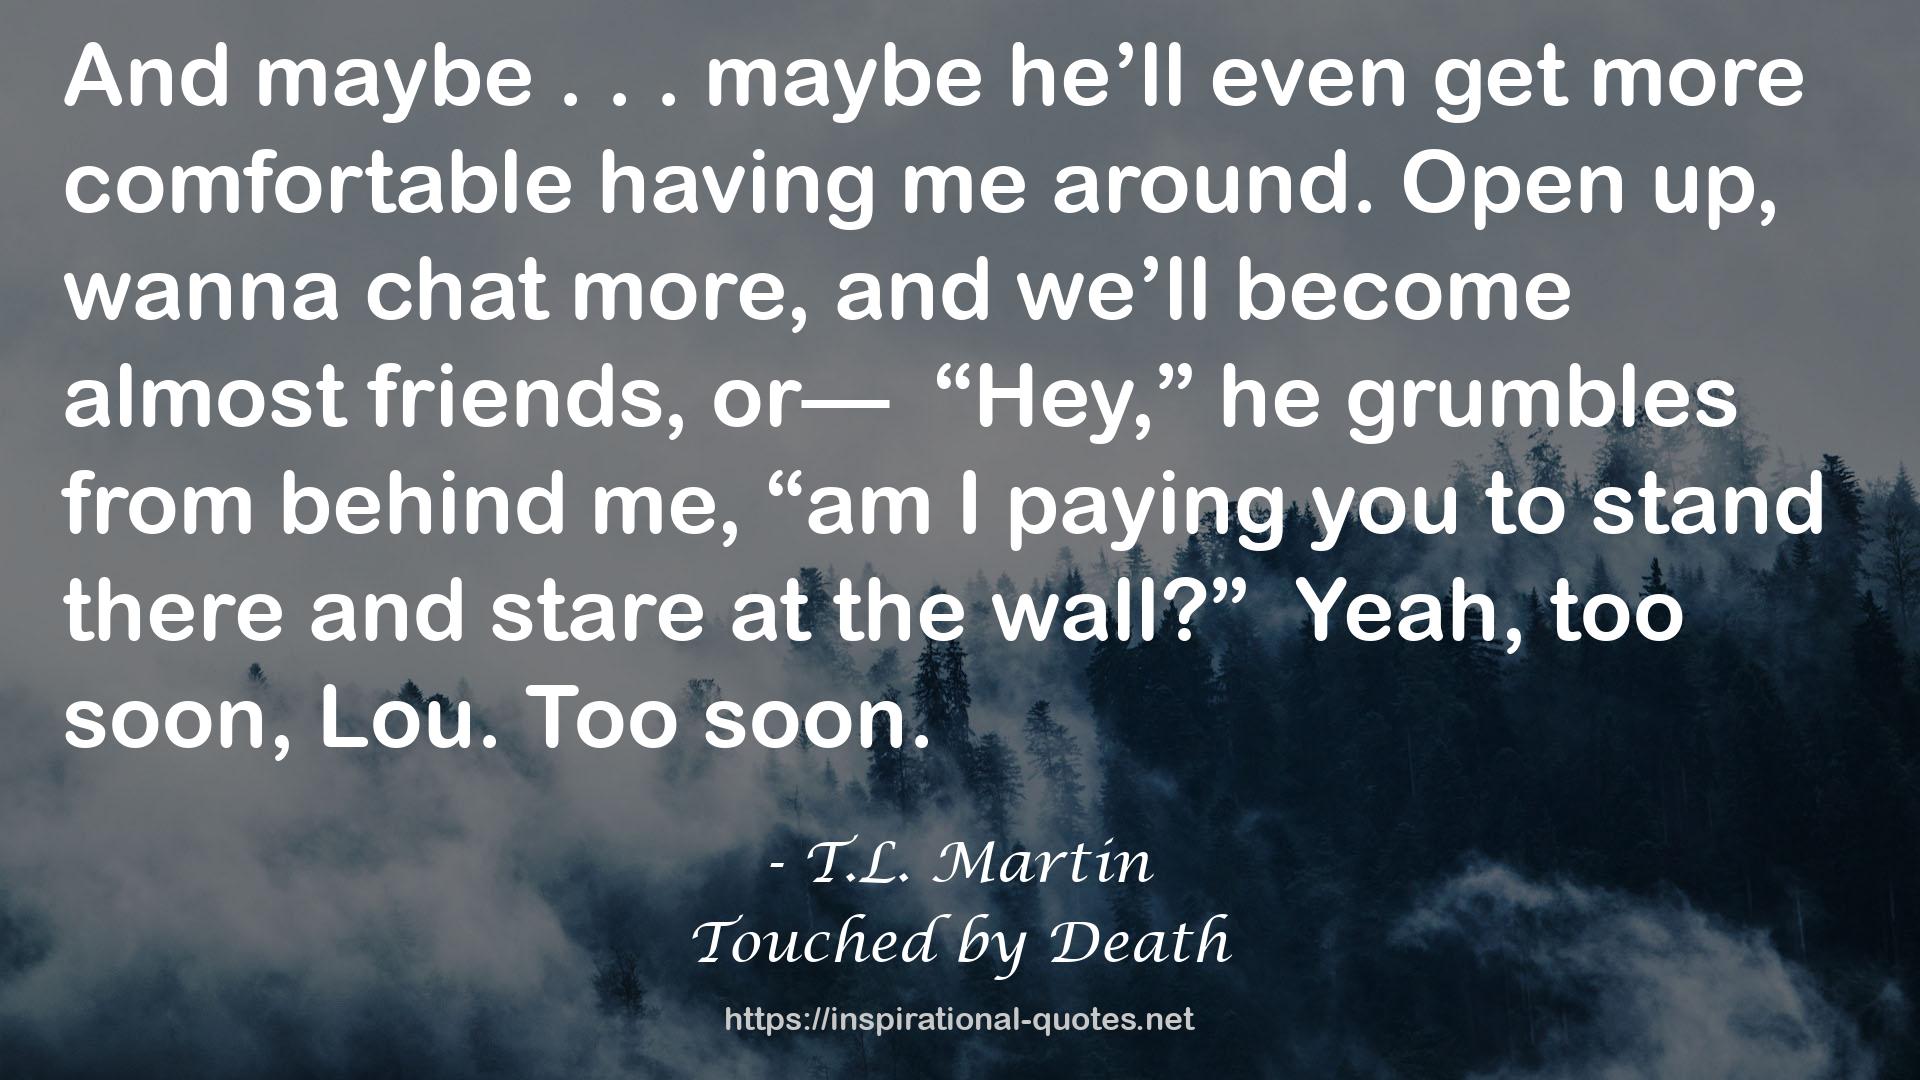 Touched by Death QUOTES